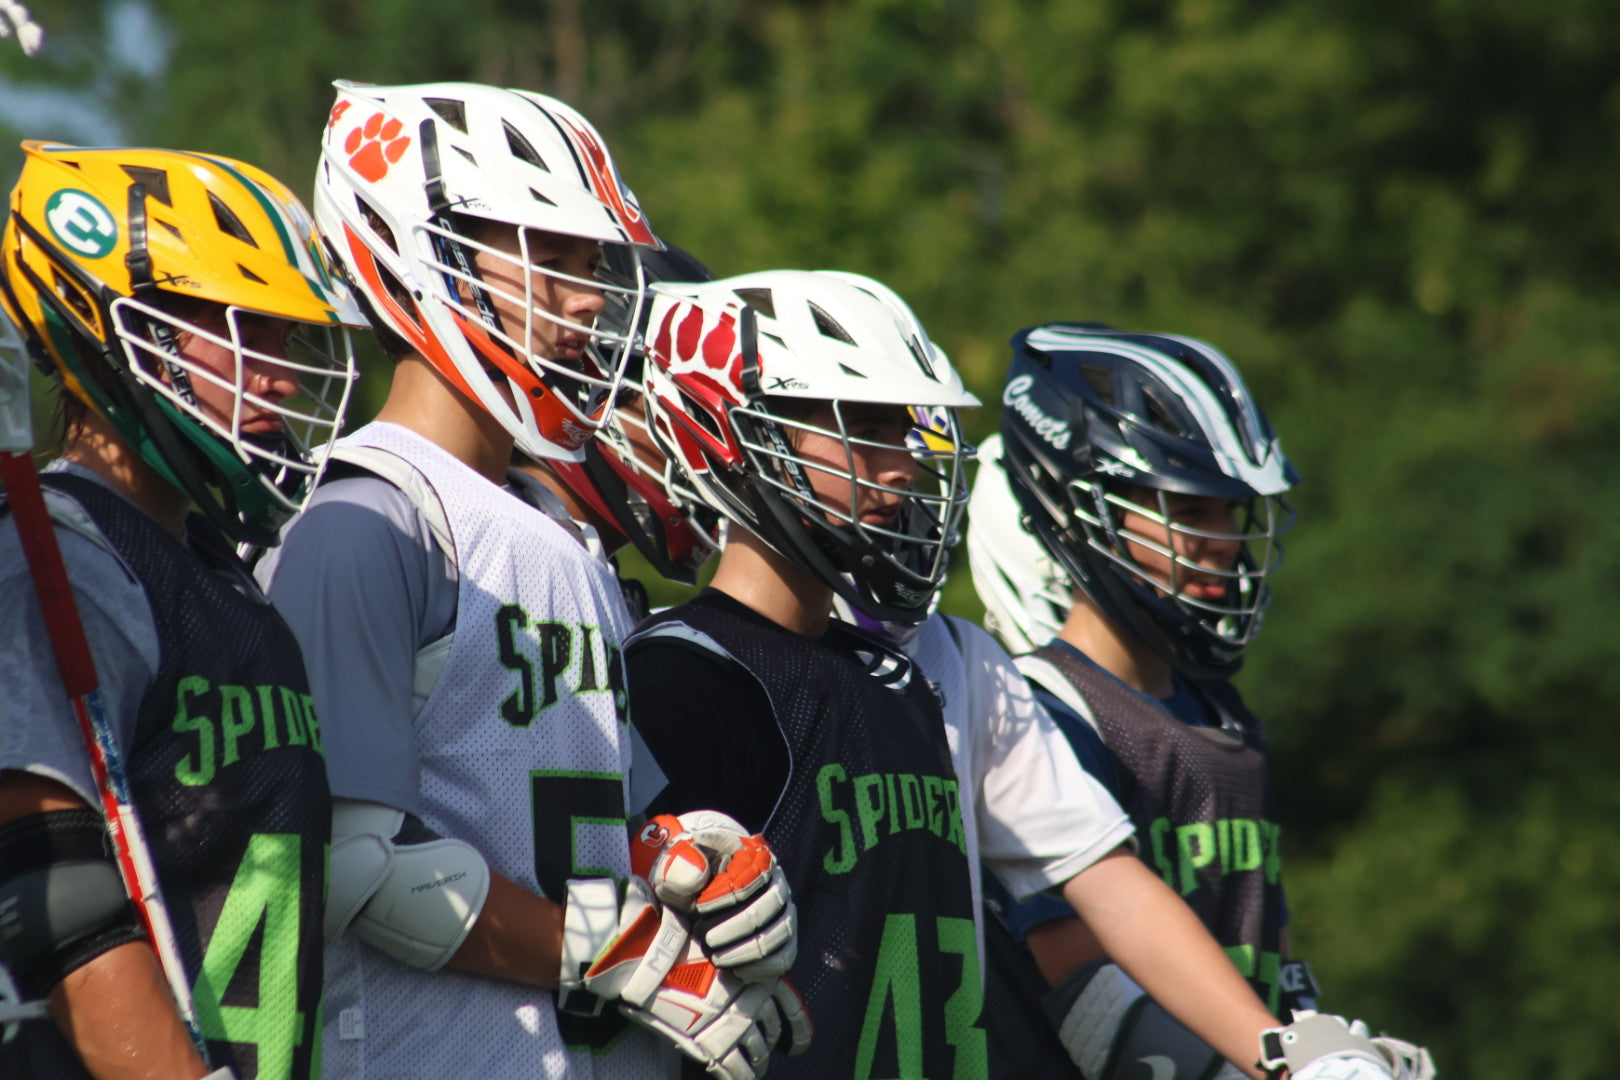 Photo Gallery: Spiders Lacrosse Club Tryouts